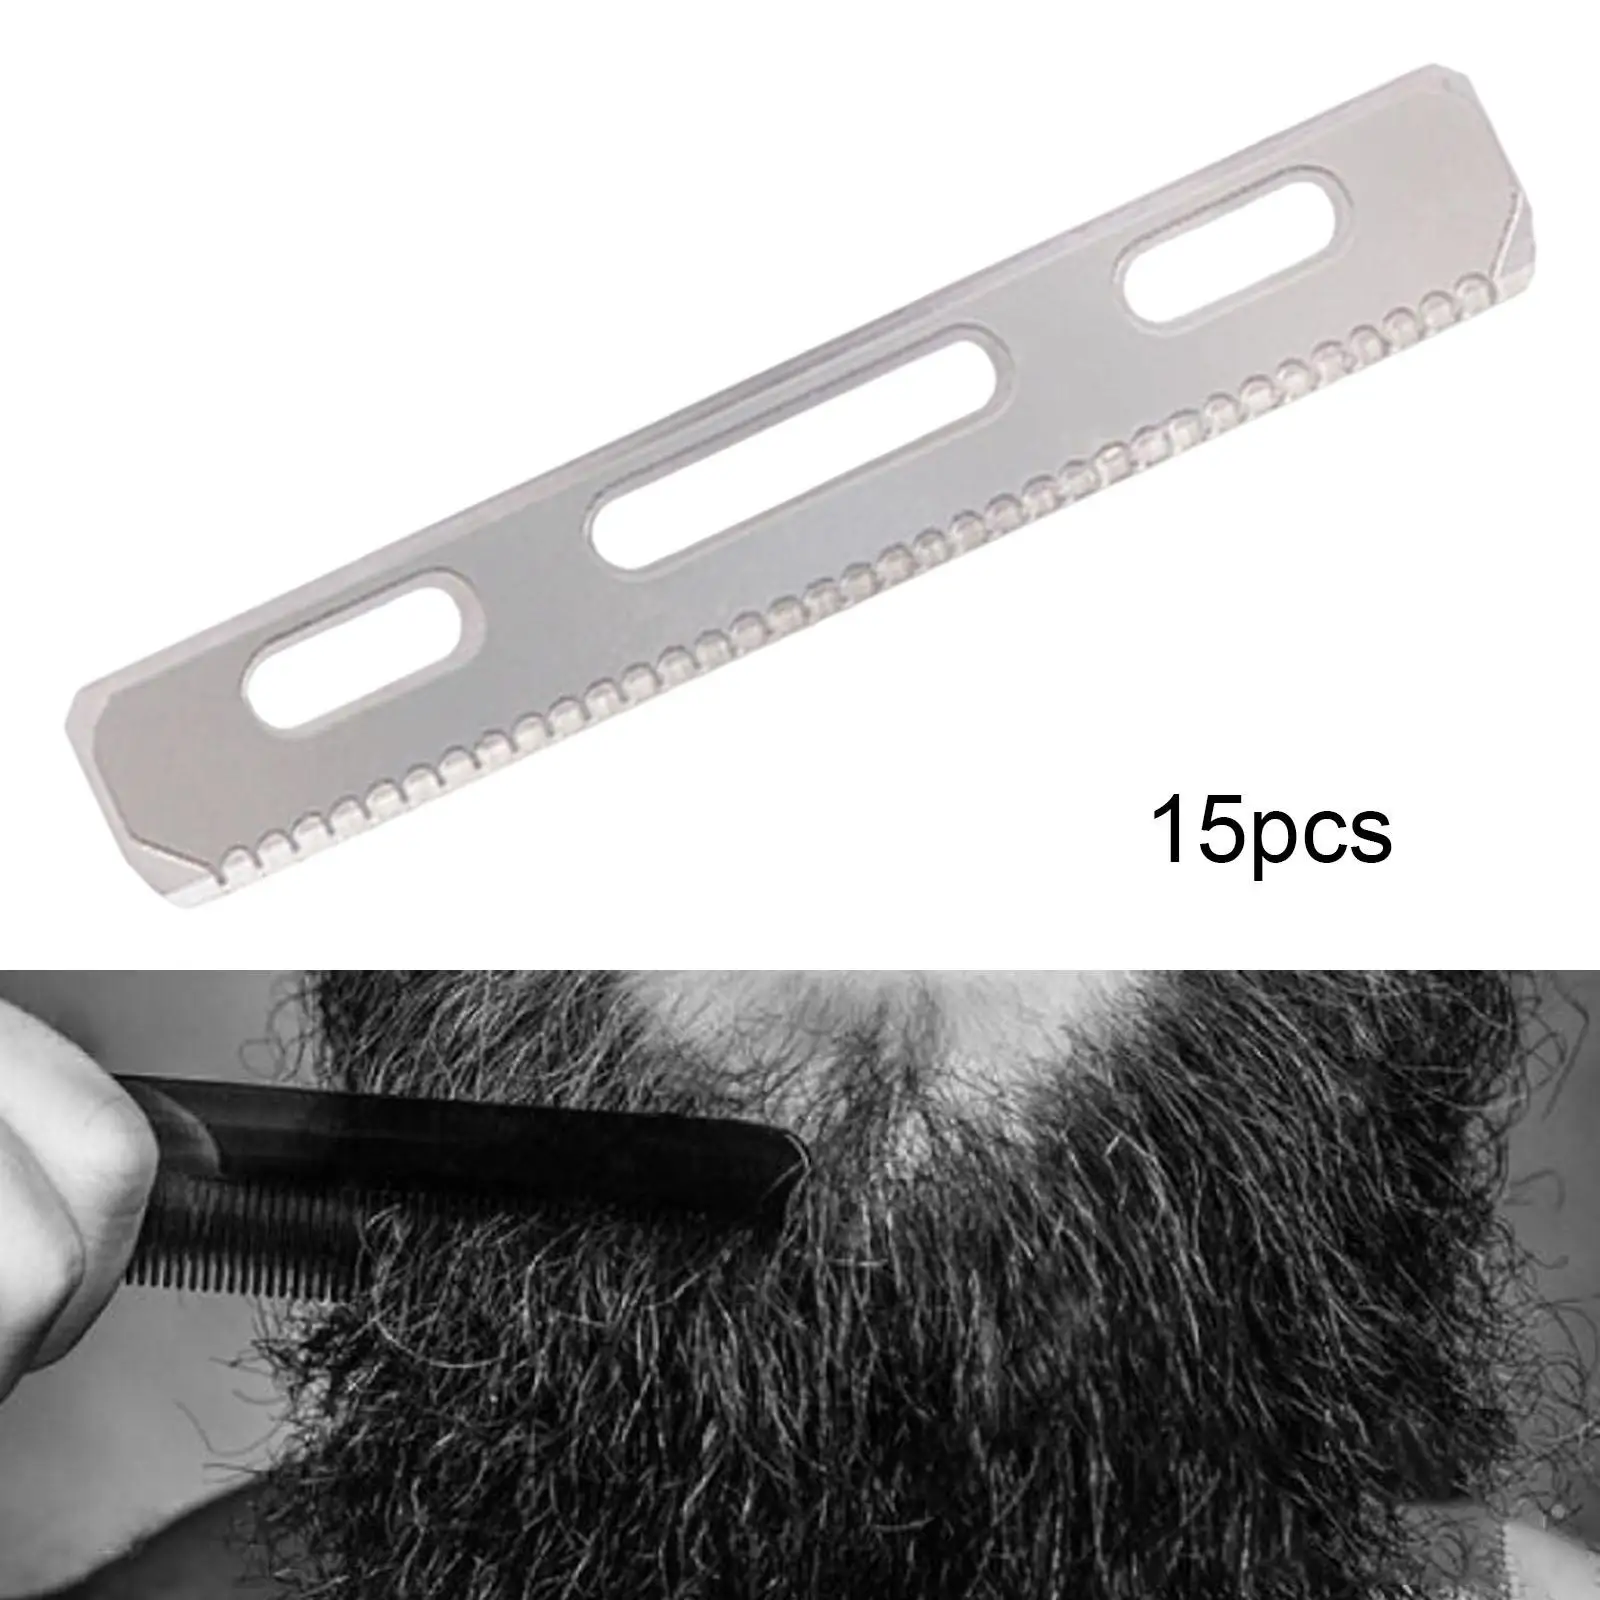 Eyebrow Trimmer Scraper Stainless Steel with Cover Facial Makeup Eyebrow Shaping Shaver Knife hair Removal Men Women